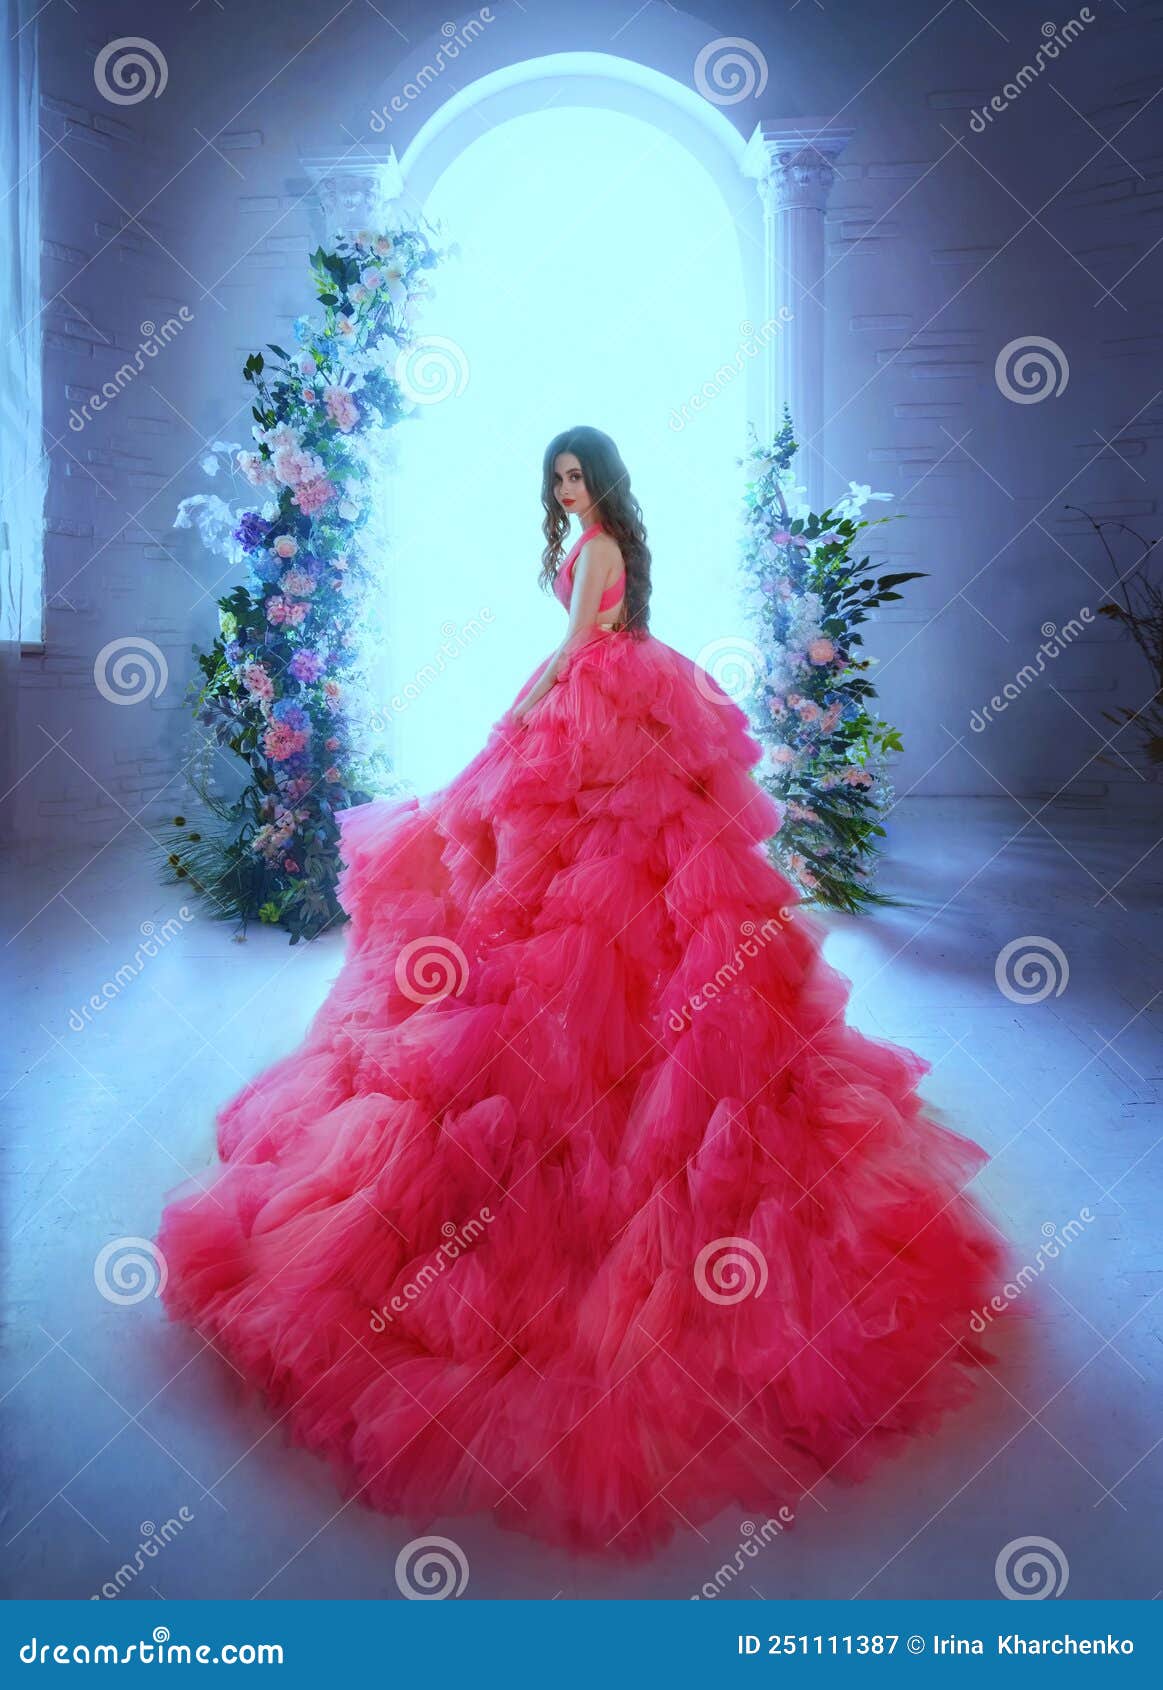 Full Length Portrait Girl Wearing Long Red Silk Gown Standing Stock Photo  by ©faestock 298887234